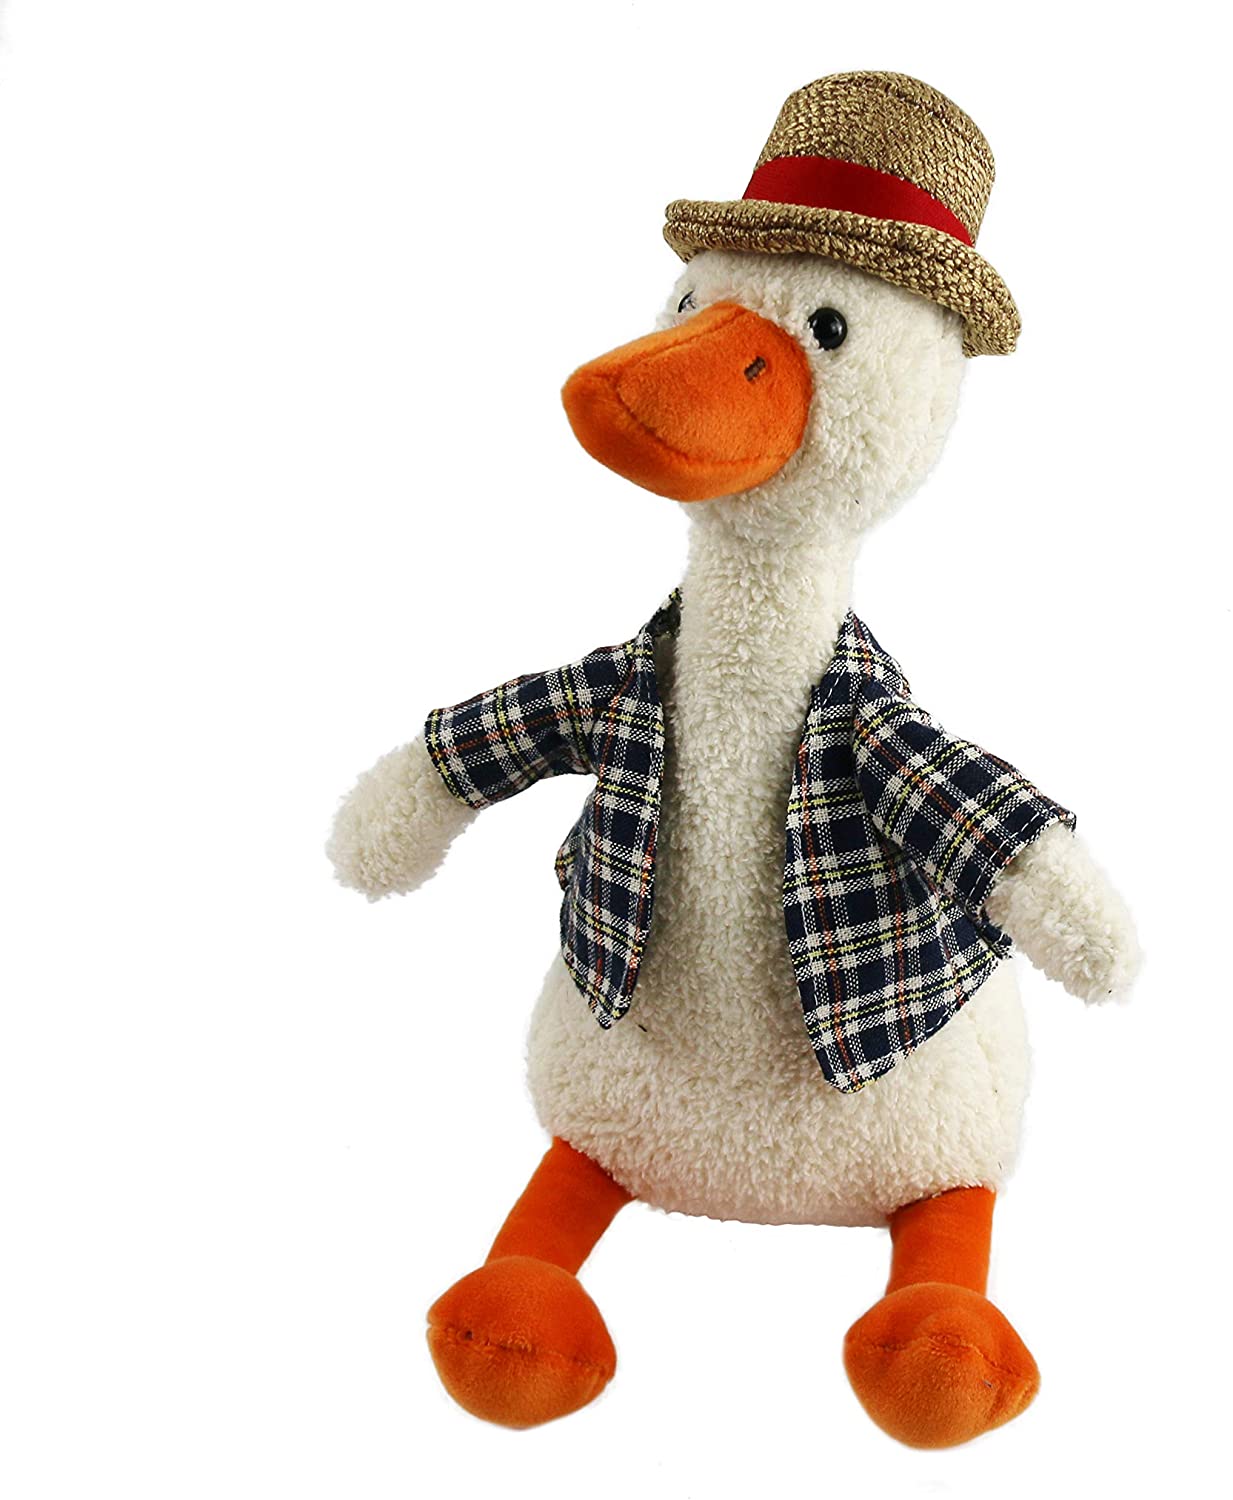 Houwsbaby Duck in Plaid Shirt Plush Toy Totter Stuffed Animal with Hat Adorable Gift for Kids on Christmas, 11'', Beige